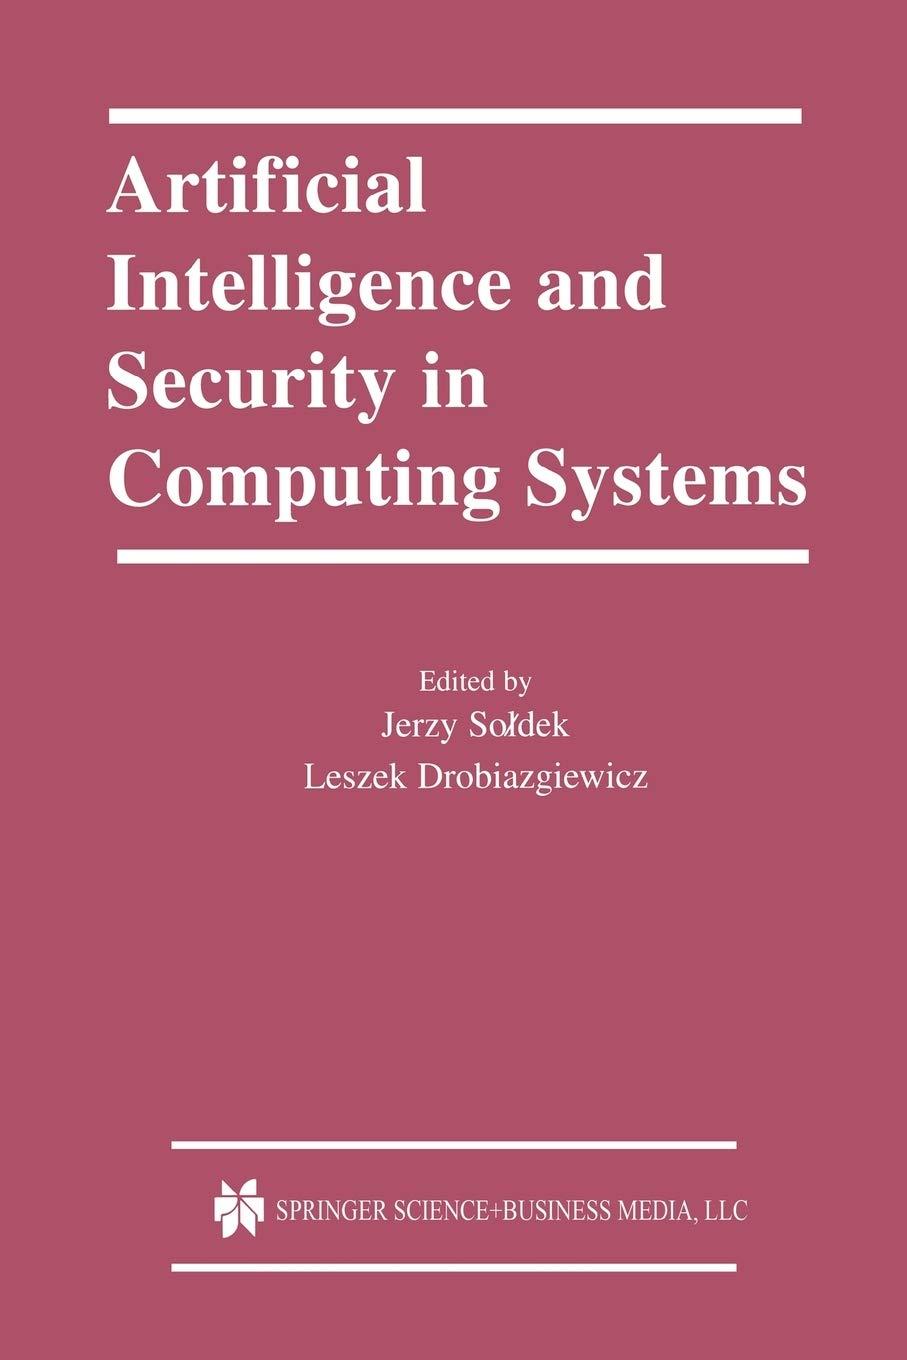 artificial intelligence and security in computing systems 2003 edition jerzy soldek, leszek drobiazgiewicz